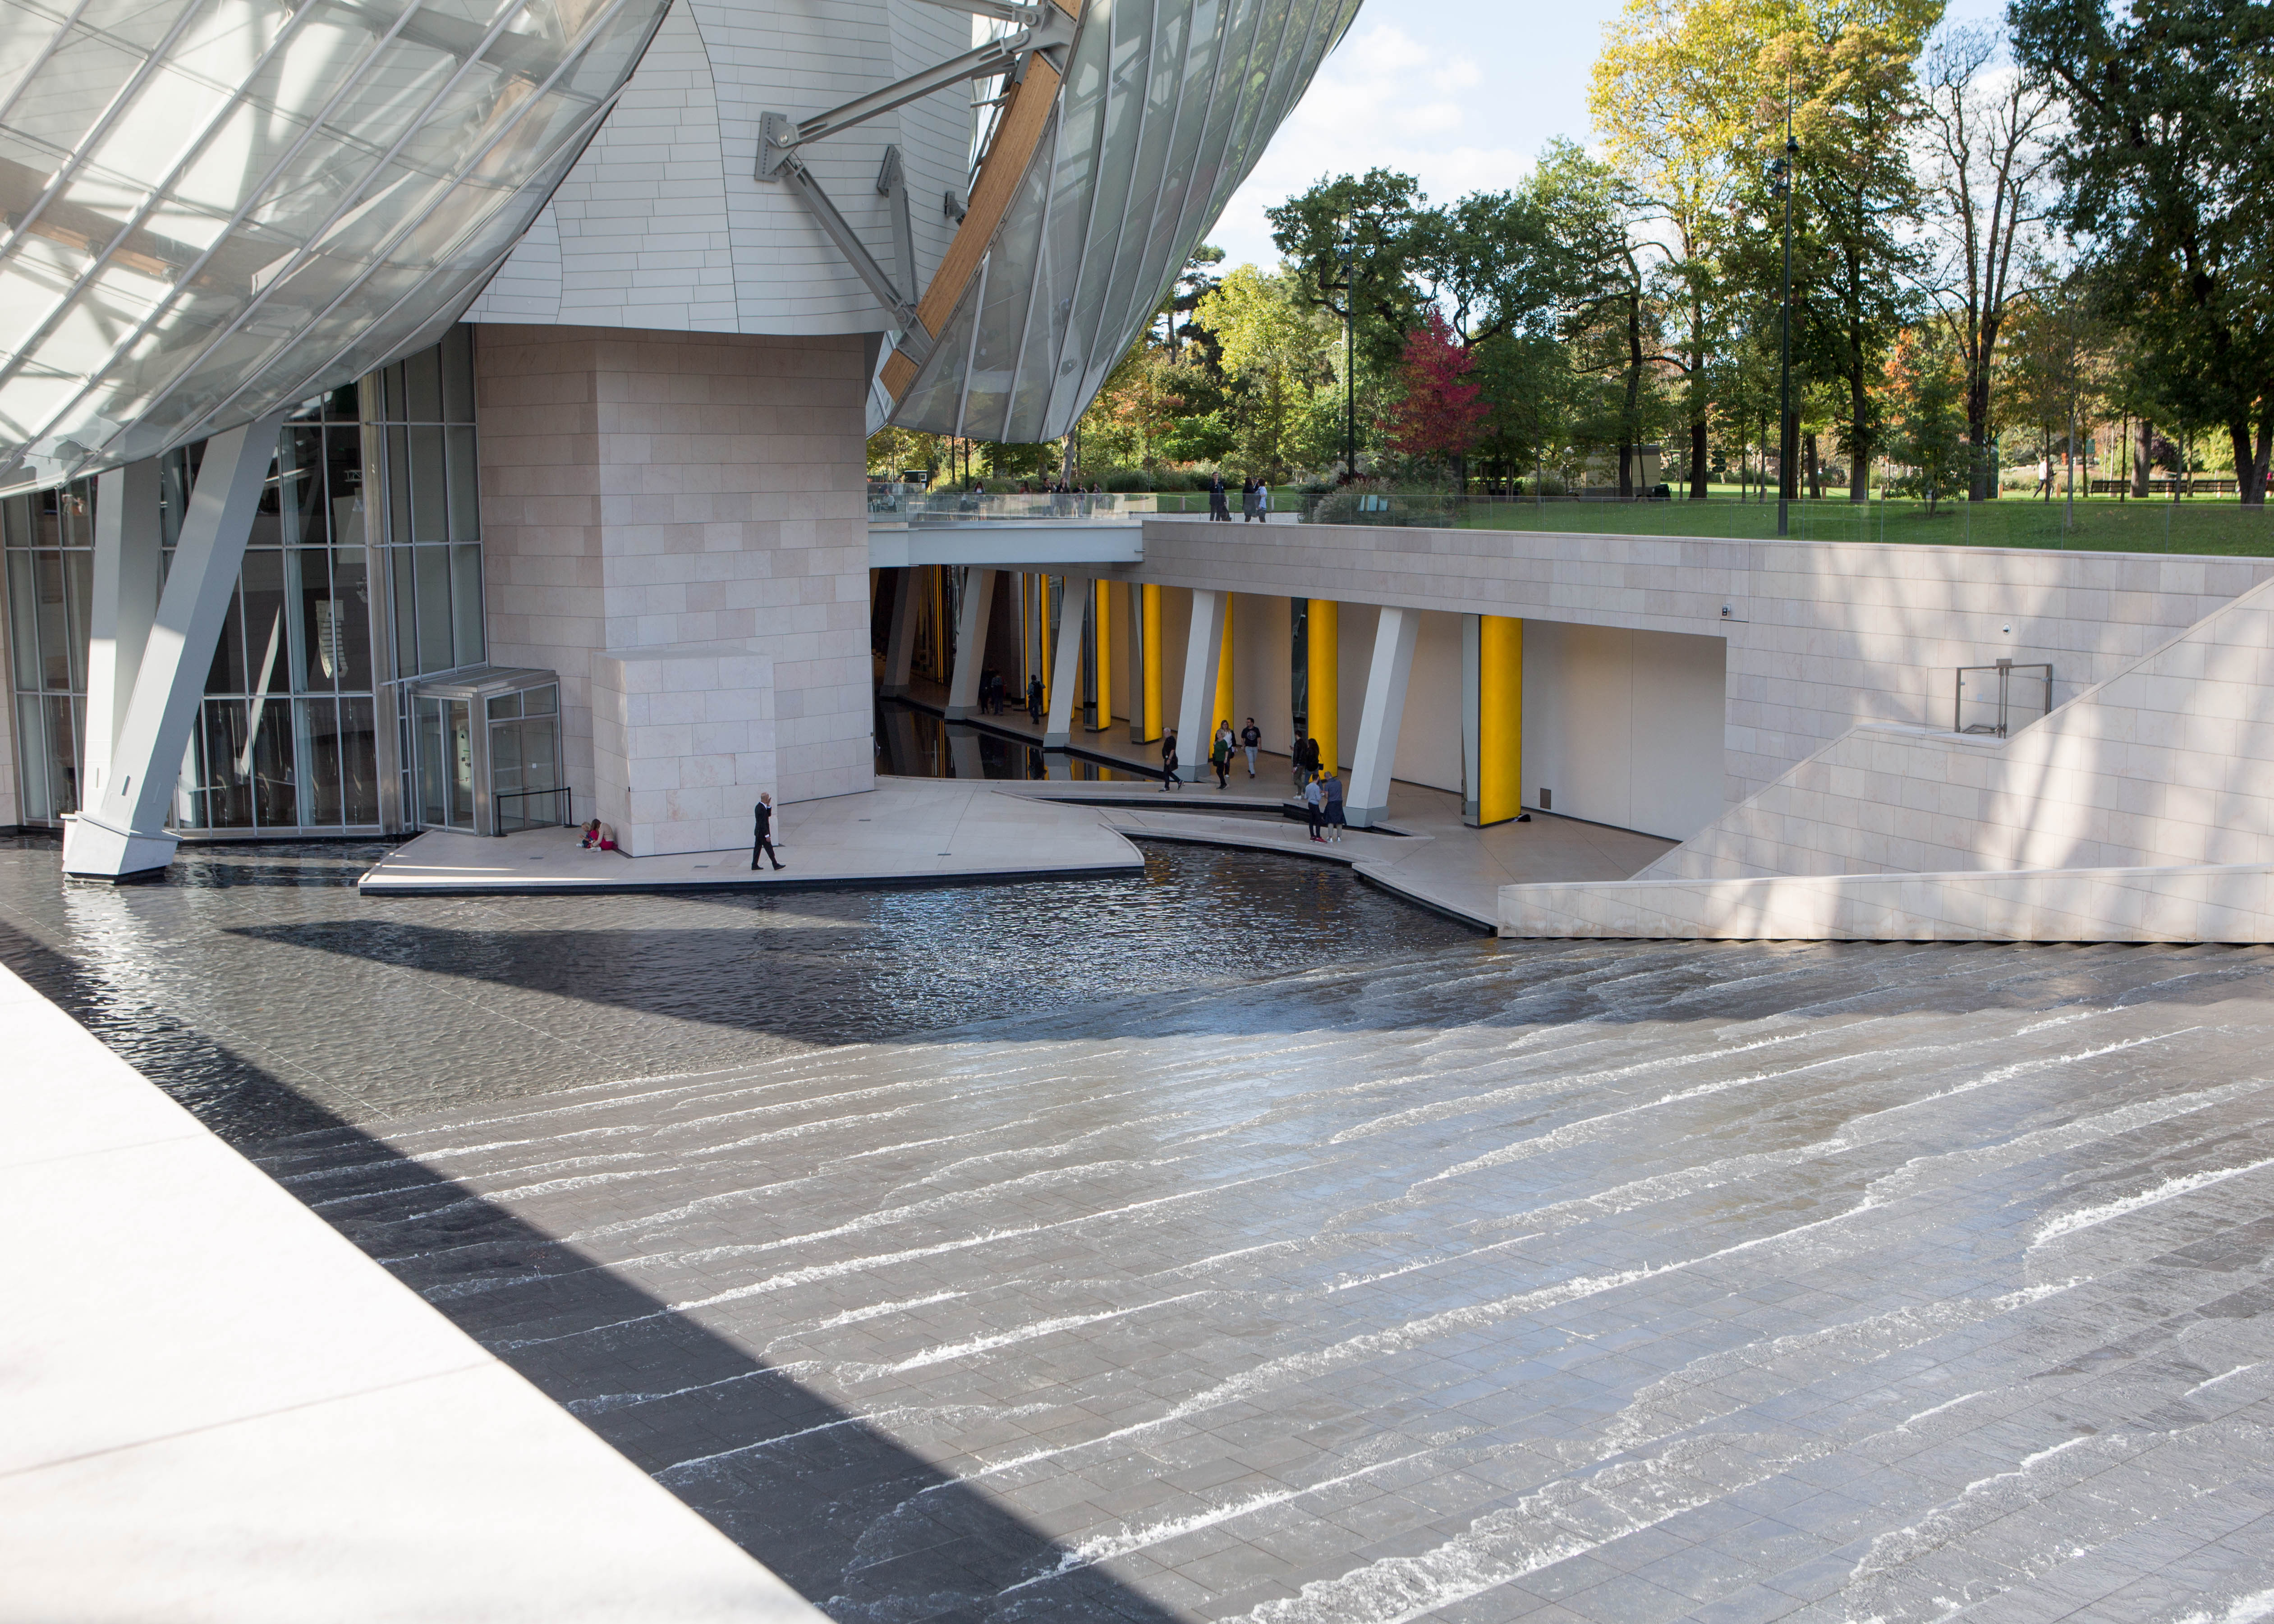 Tickets Louis Vuitton Foundation - Buy tickets for the Louis